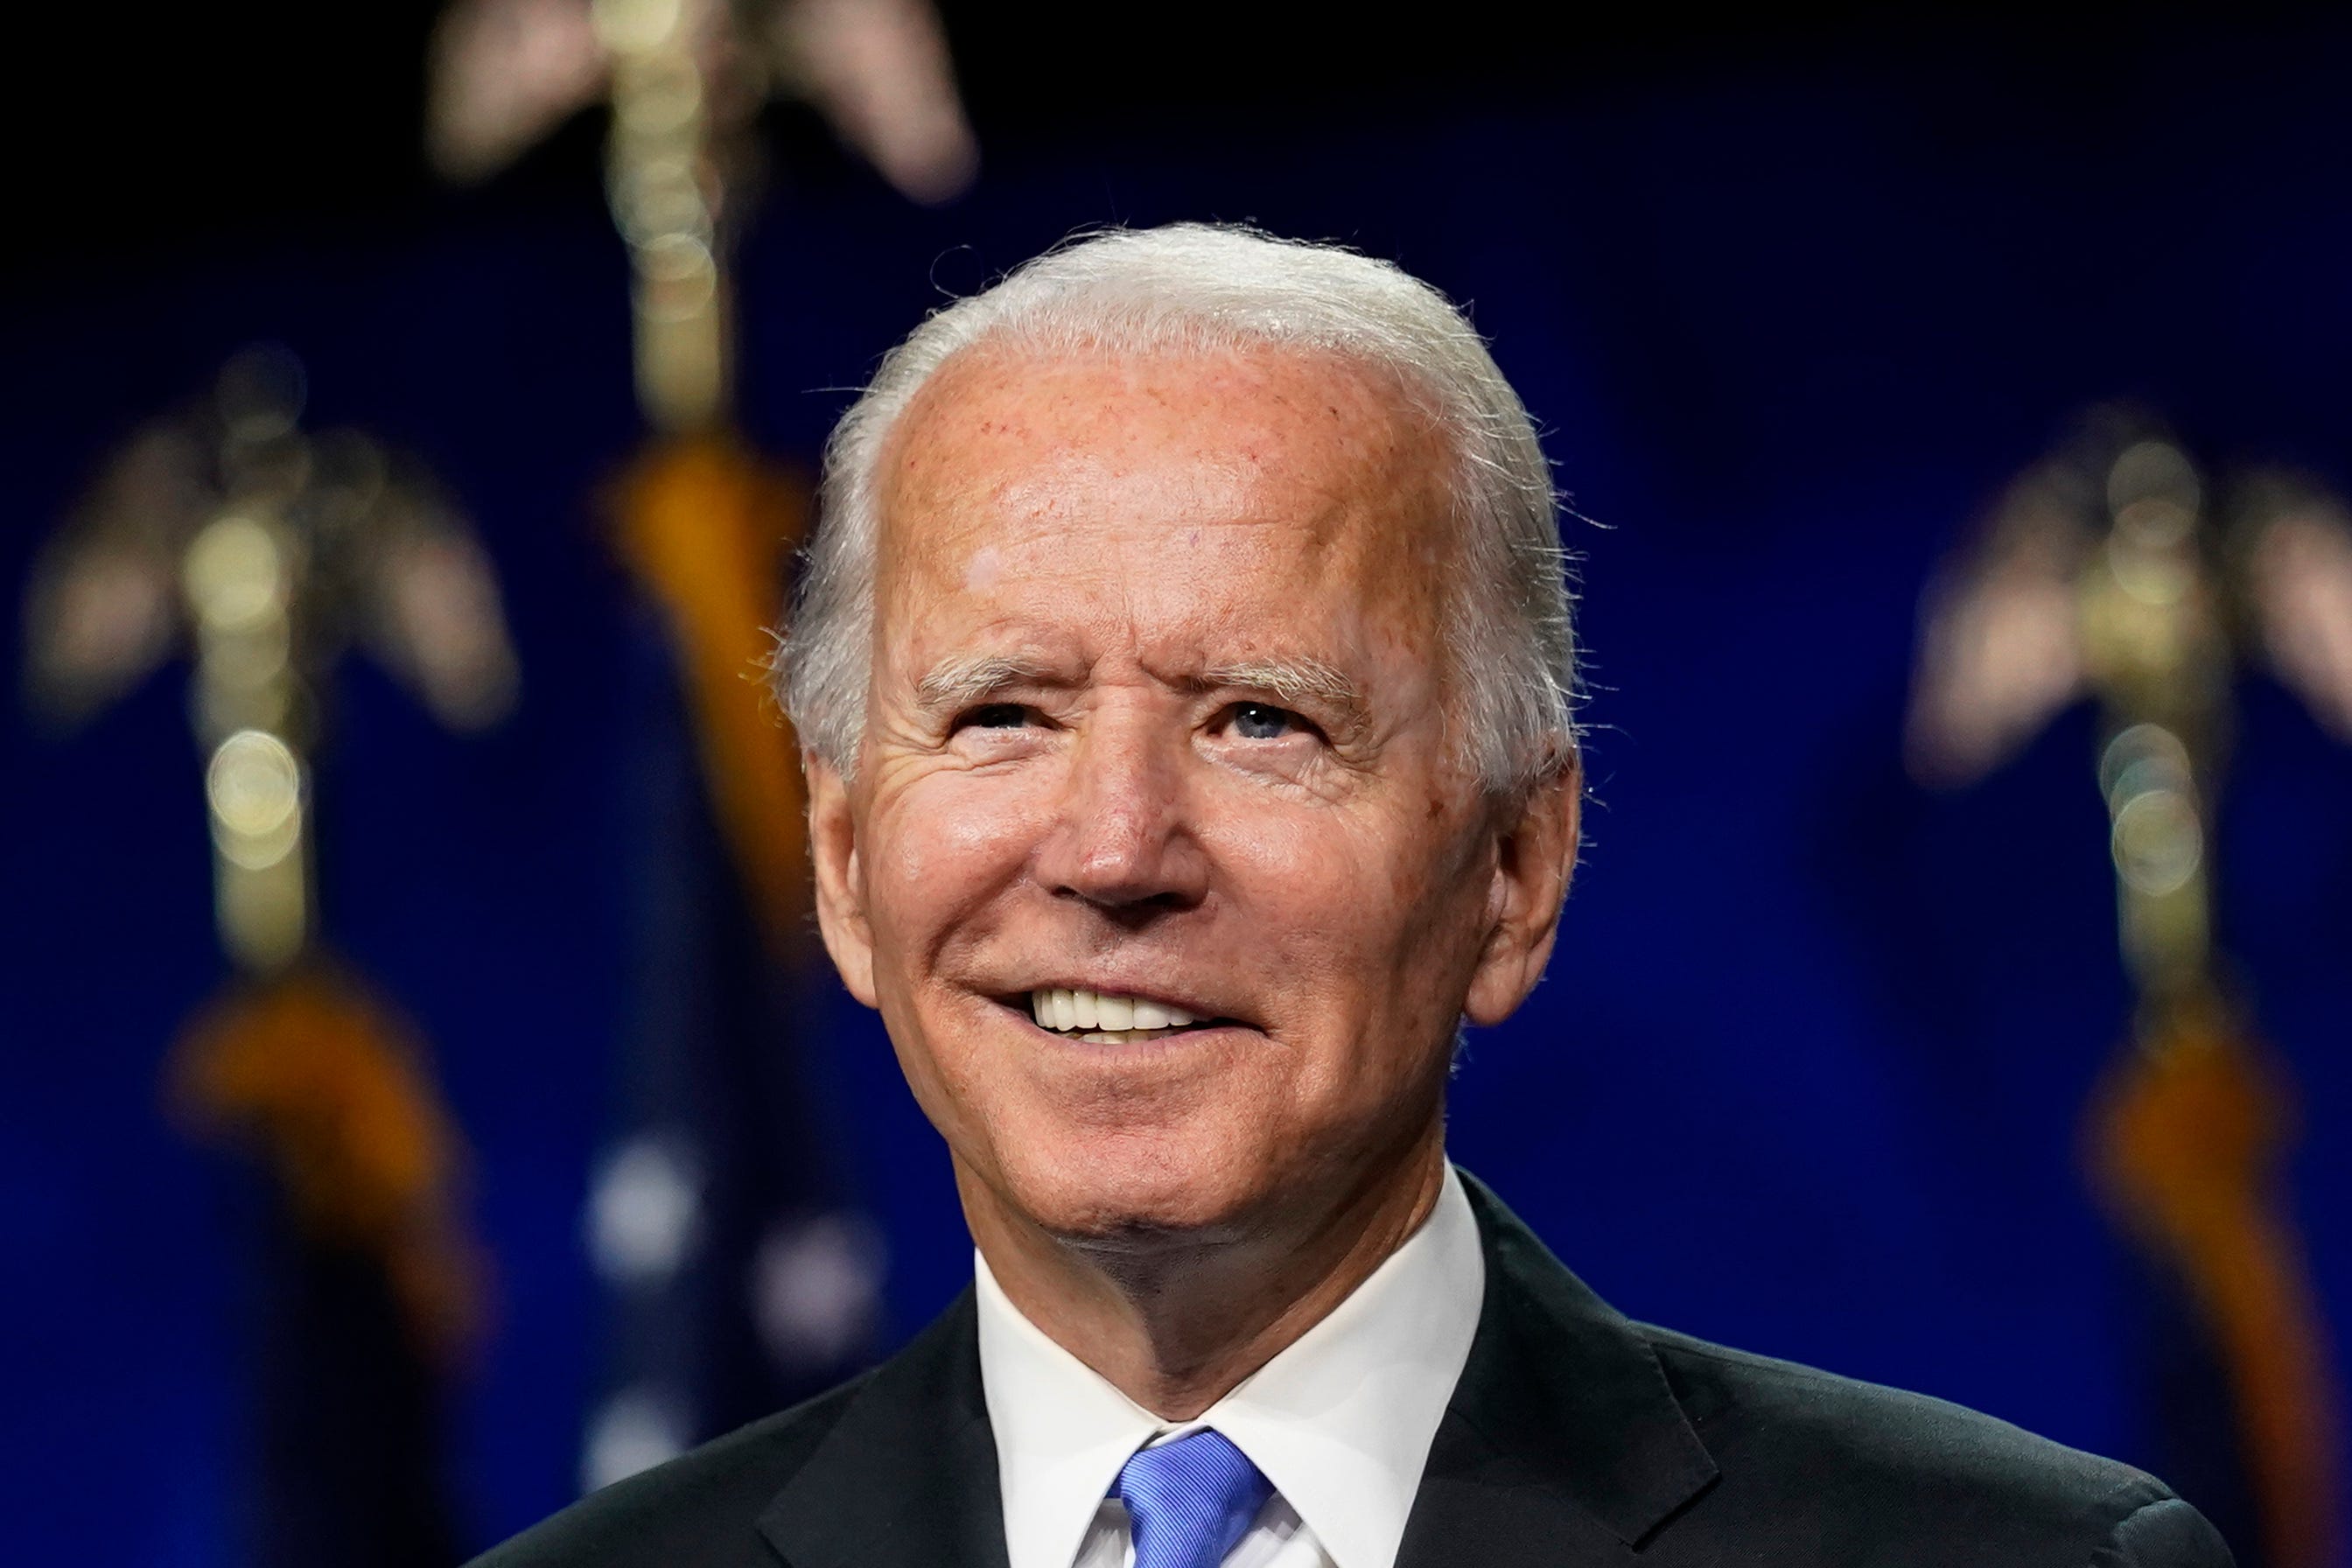 how is joe biden still winning - Biden|President|Joe|States|Delaware|Obama|Vice|Senate|Campaign|Election|Time|Administration|House|Law|People|Years|Family|Year|Trump|School|University|Senator|Office|Party|Country|Committee|Act|War|Days|Climate|Hunter|Health|America|State|Day|Democrats|Americans|Documents|Care|Plan|United States|Vice President|White House|Joe Biden|Biden Administration|Democratic Party|Law School|Presidential Election|President Joe Biden|Executive Orders|Foreign Relations Committee|Presidential Campaign|Second Term|47Th Vice President|Syracuse University|Climate Change|Hillary Clinton|Last Year|Barack Obama|Joseph Robinette Biden|U.S. Senator|Health Care|U.S. Senate|Donald Trump|President Trump|President Biden|Federal Register|Judiciary Committee|Presidential Nomination|Presidential Medal